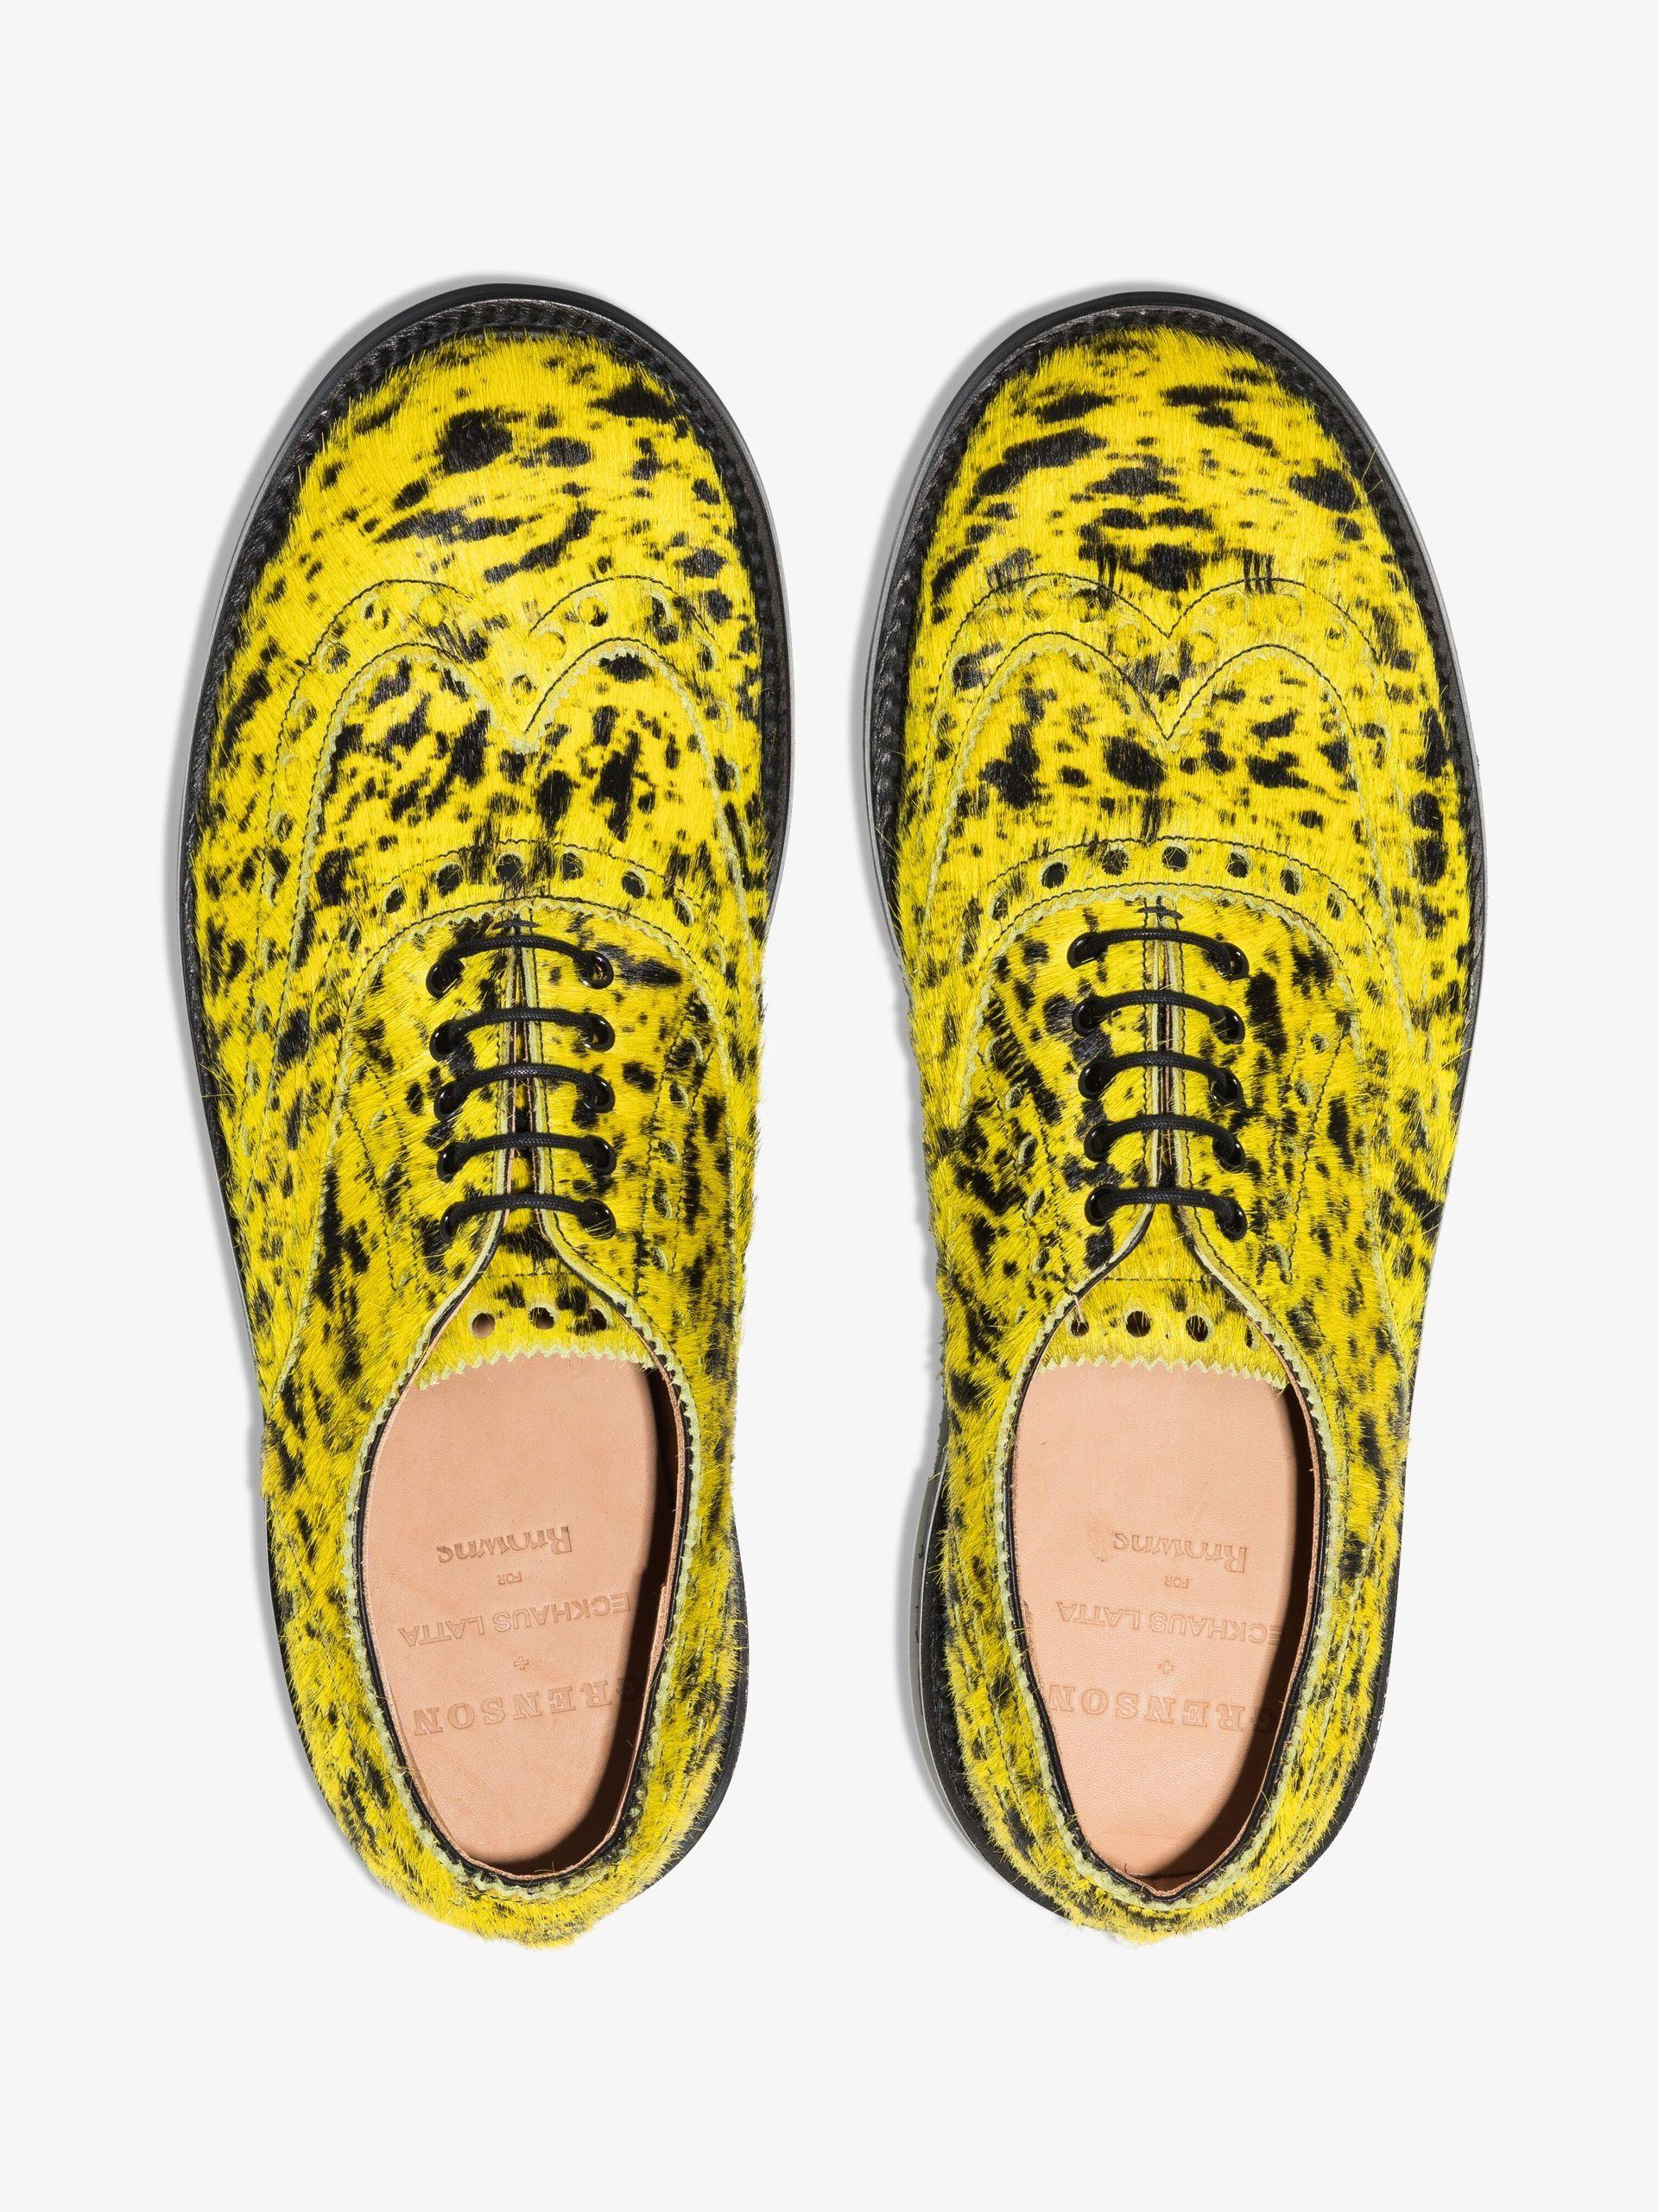 Grenson X Eckhaus Latta Yellow The Splatter Leather Brogues for Men Mens Shoes Lace-ups Brogues 